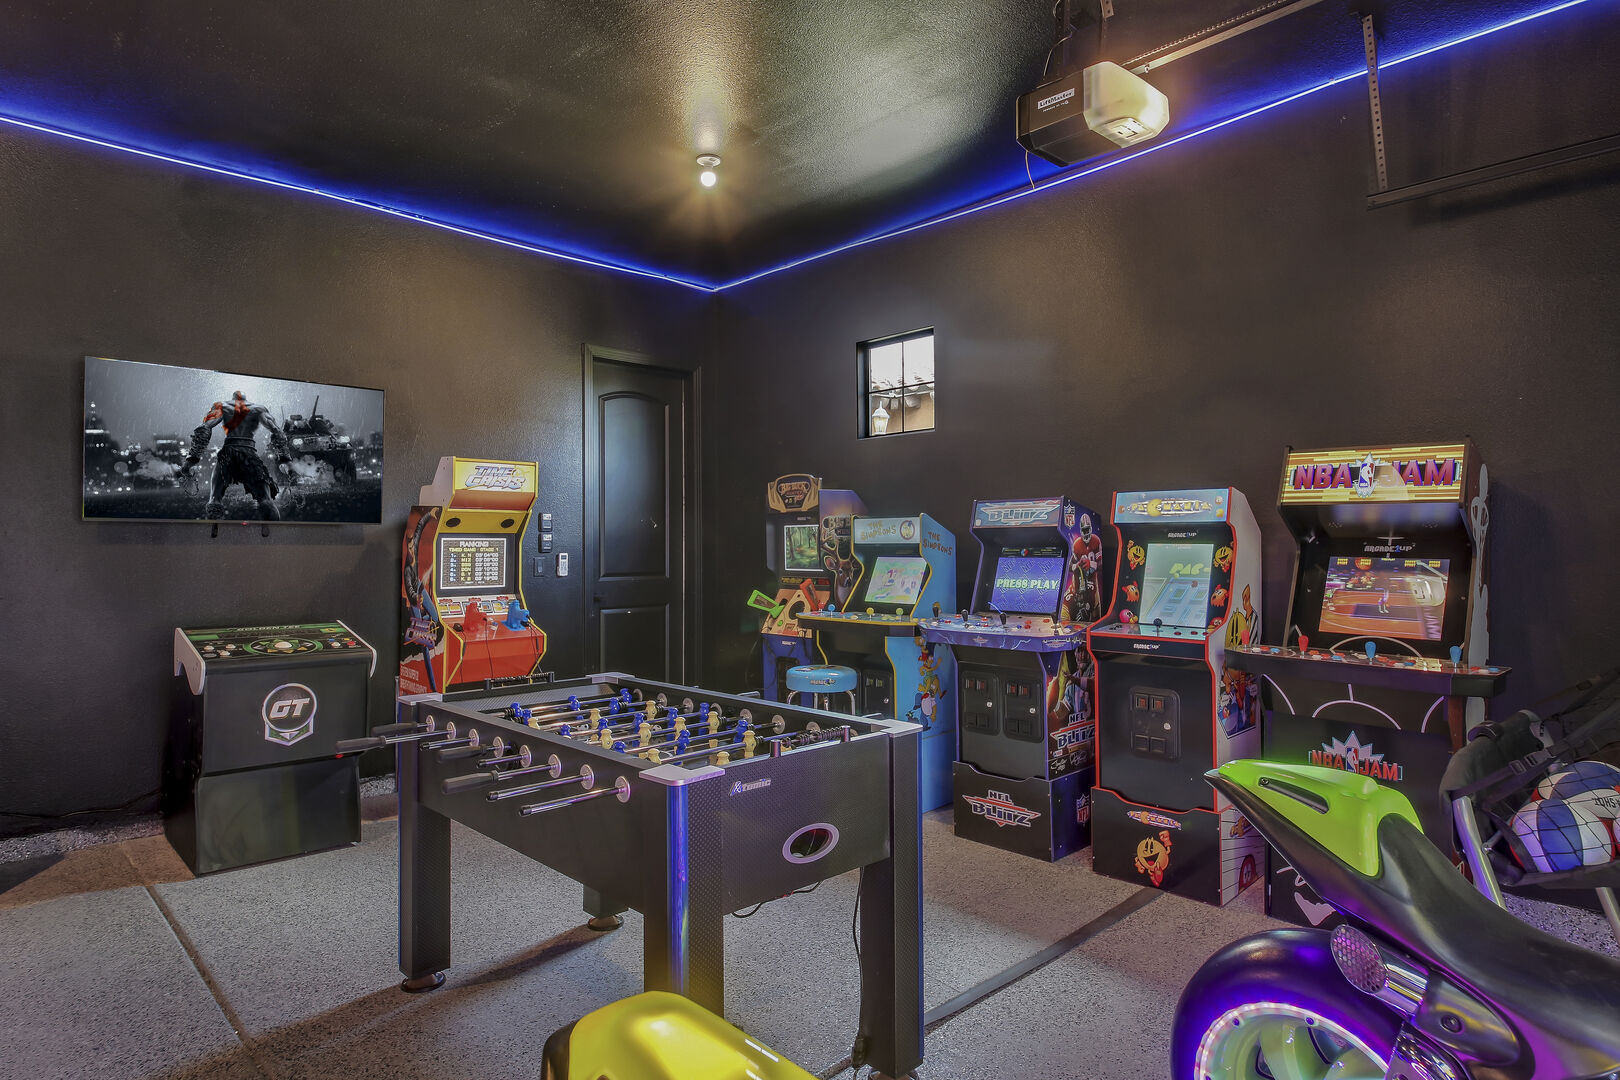 Game on! Immerse yourself in endless fun with our game room featuring glow-in-the-dark foosball and a lineup of classic arcades.